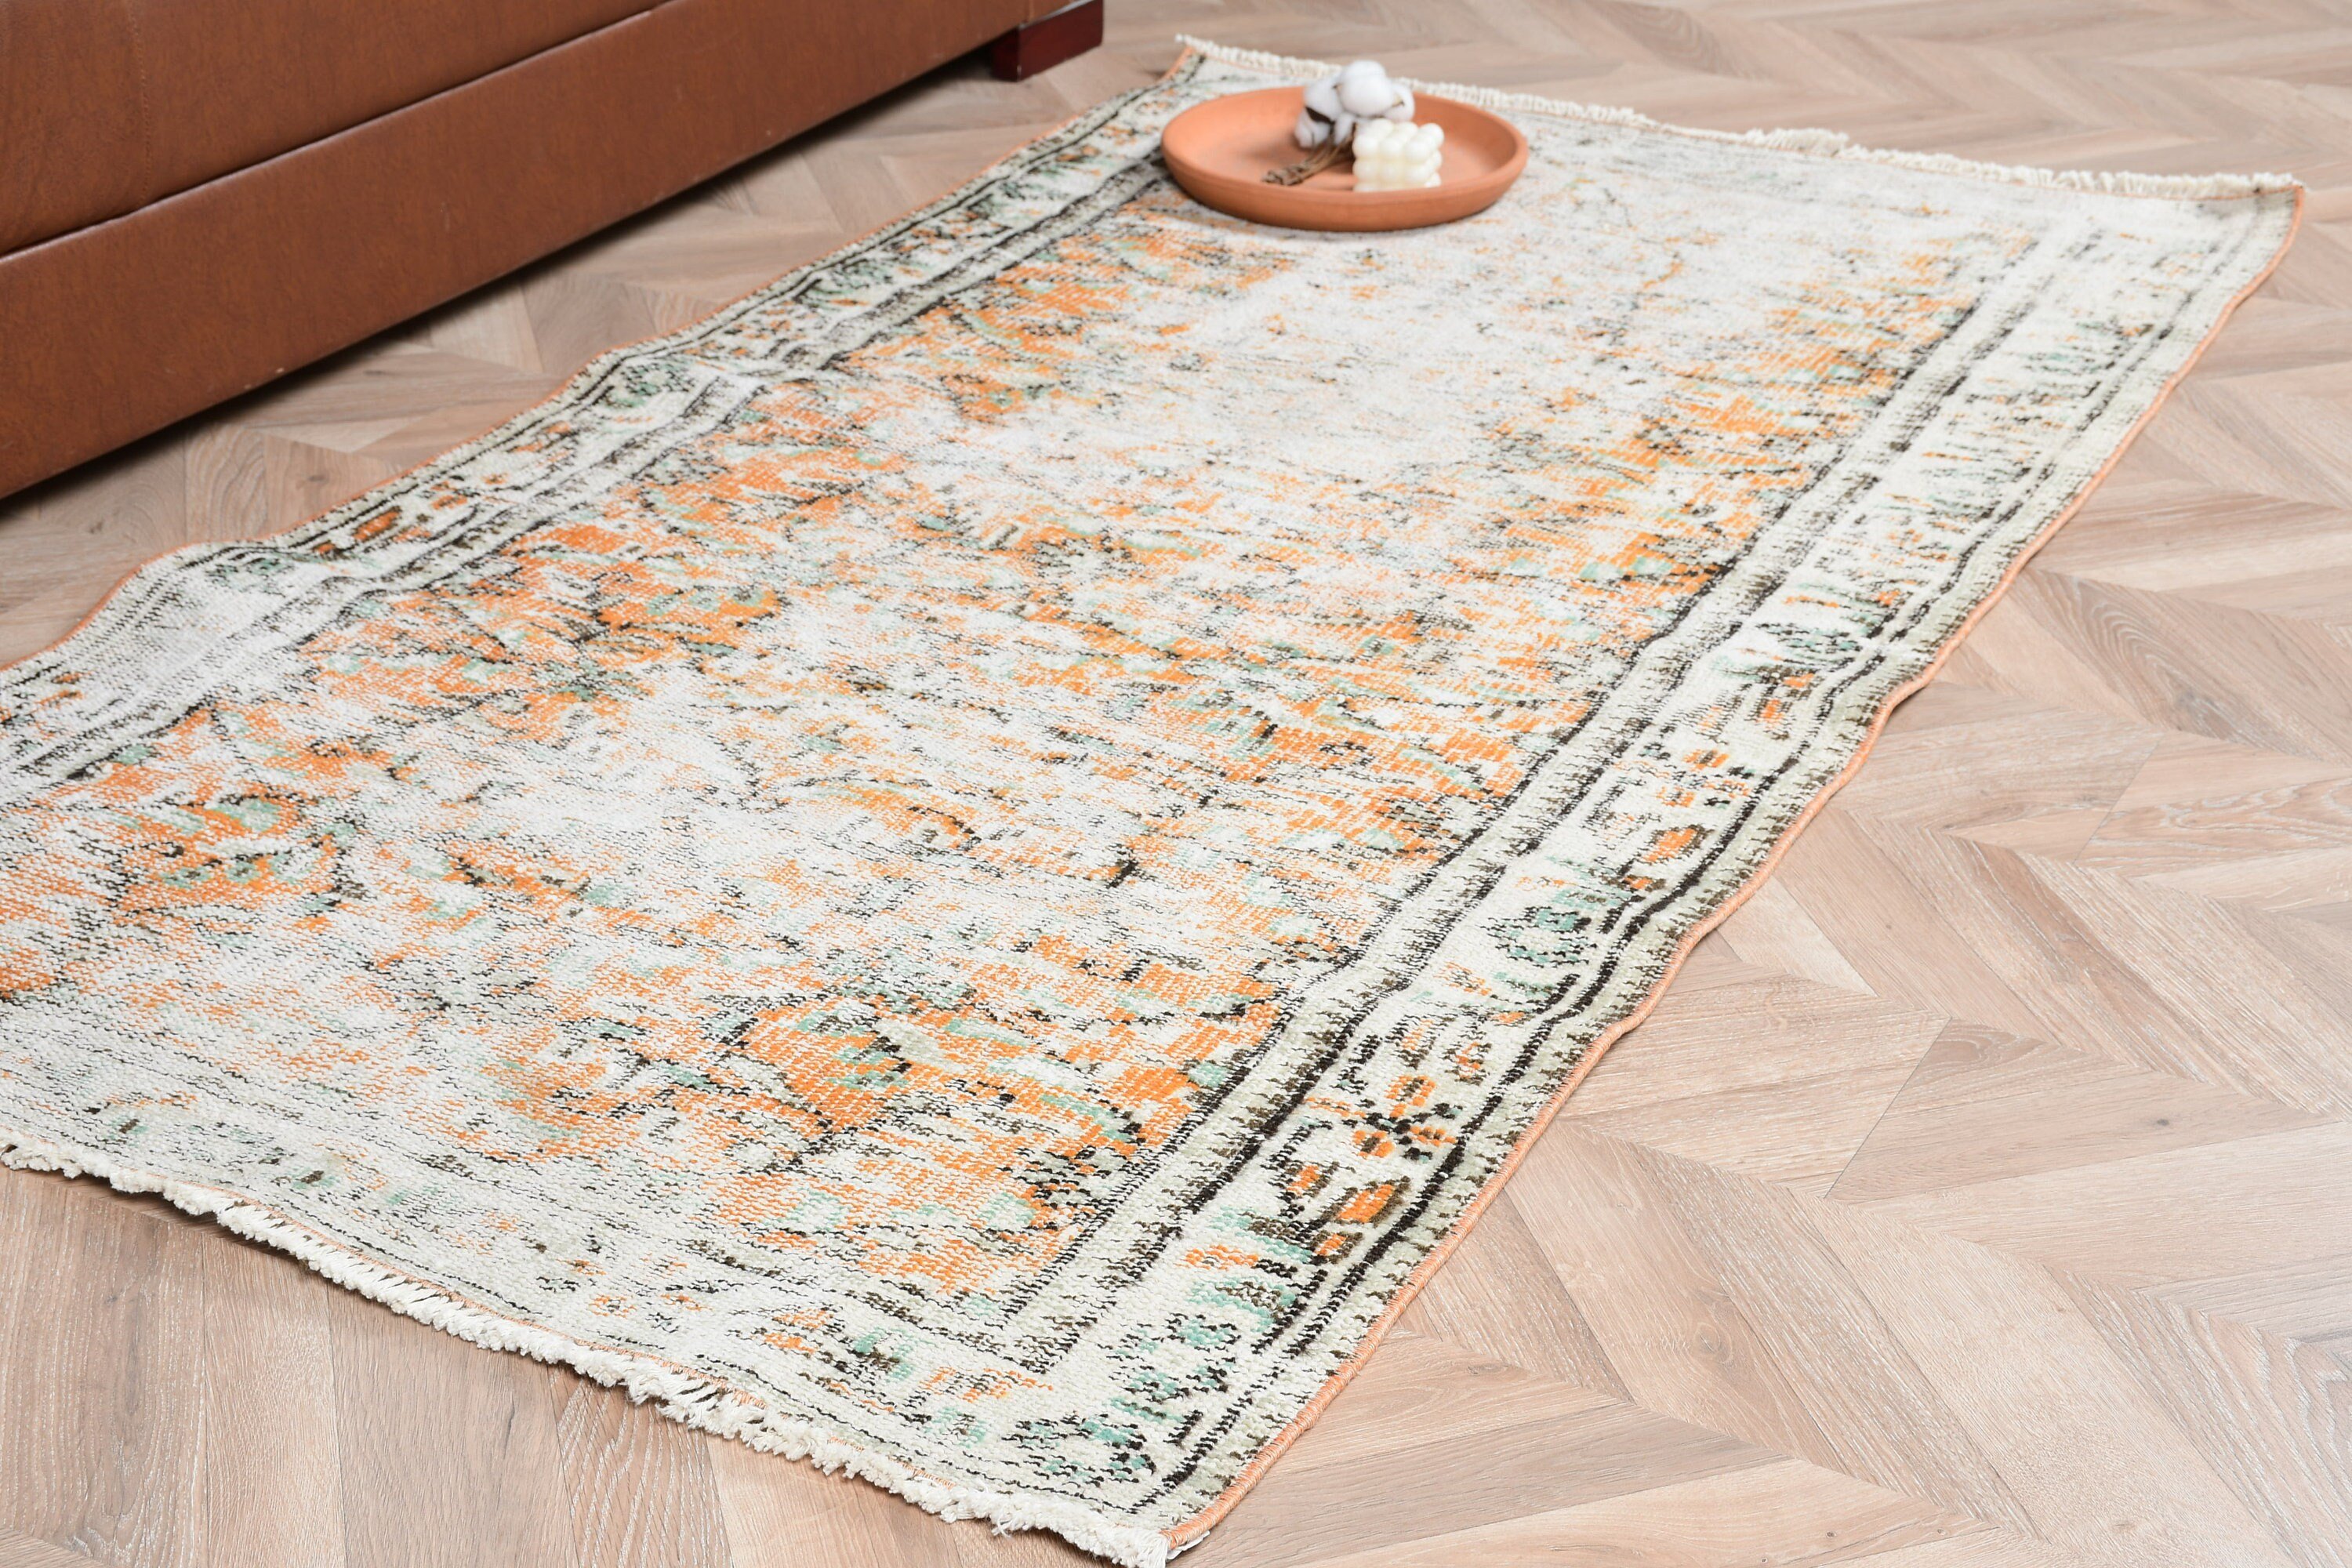 3.3x6.2 ft Accent Rugs, Entry Rugs, Orange Moroccan Rug, Vintage Rugs, Organic Rugs, Kitchen Rug, Cool Rug, Anatolian Rugs, Turkish Rug